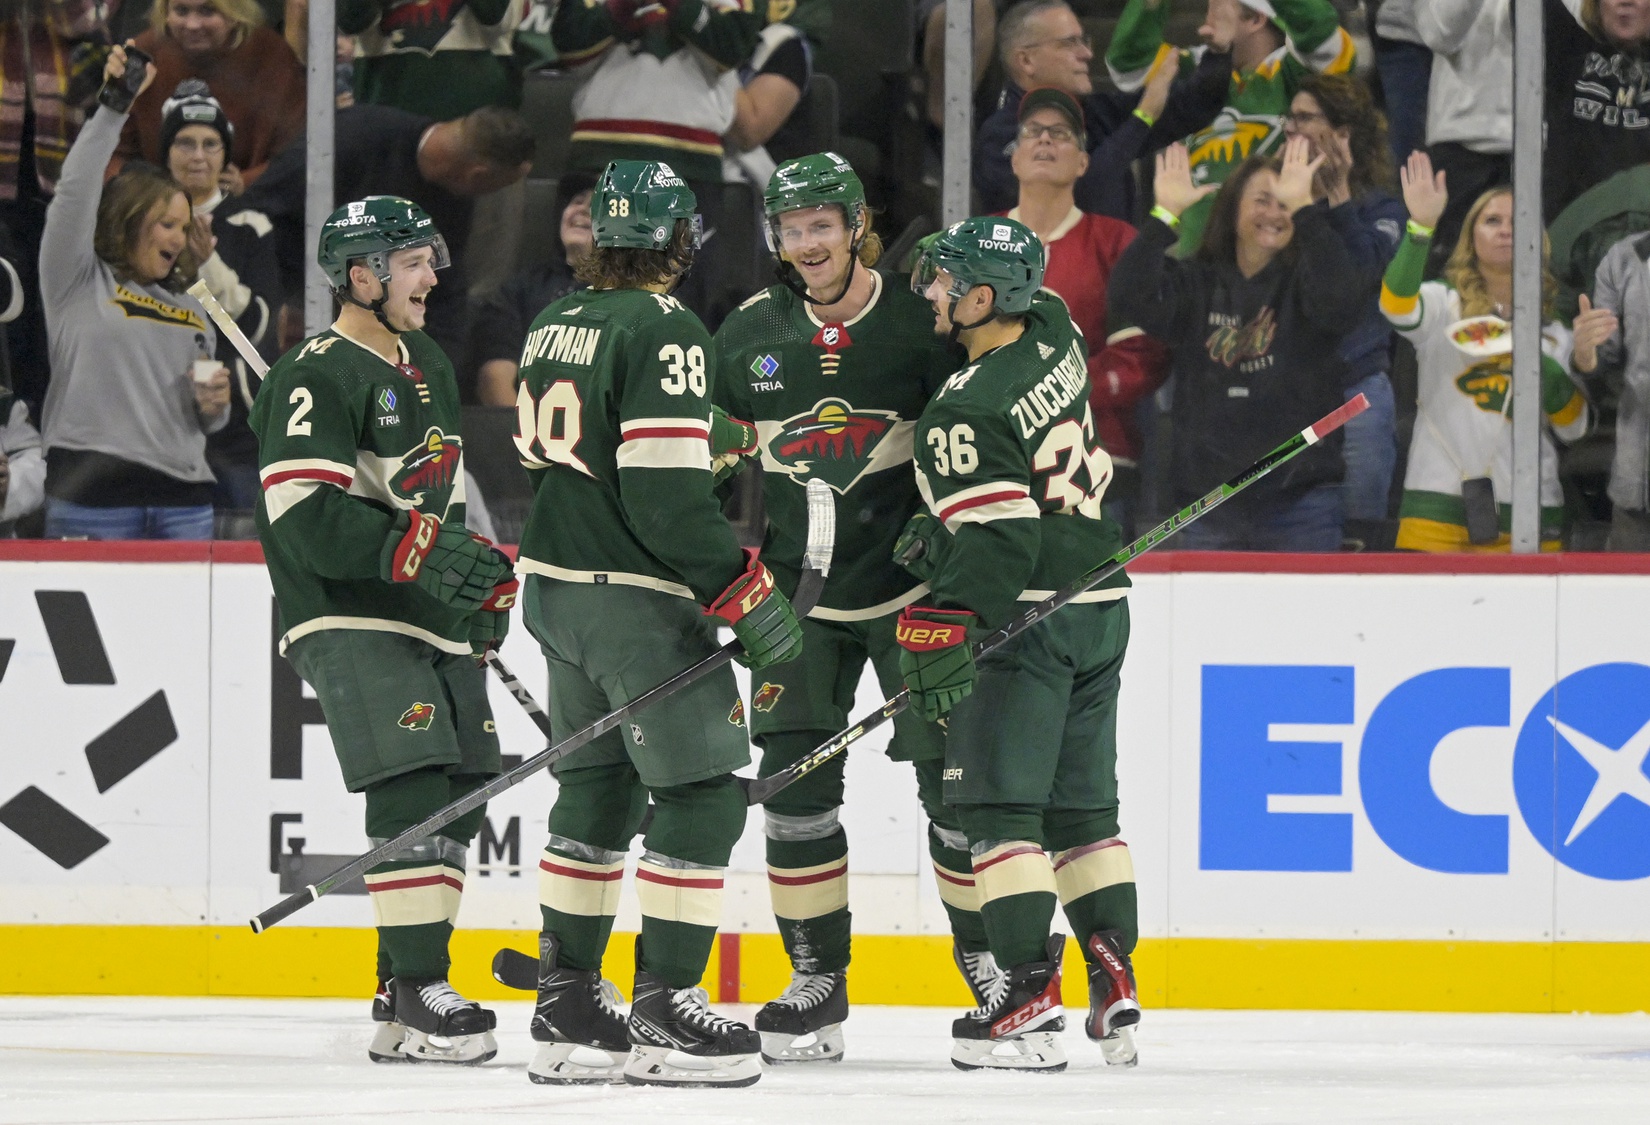 We're just getting started': Ryan Hartman signs 3-year extension with Wild